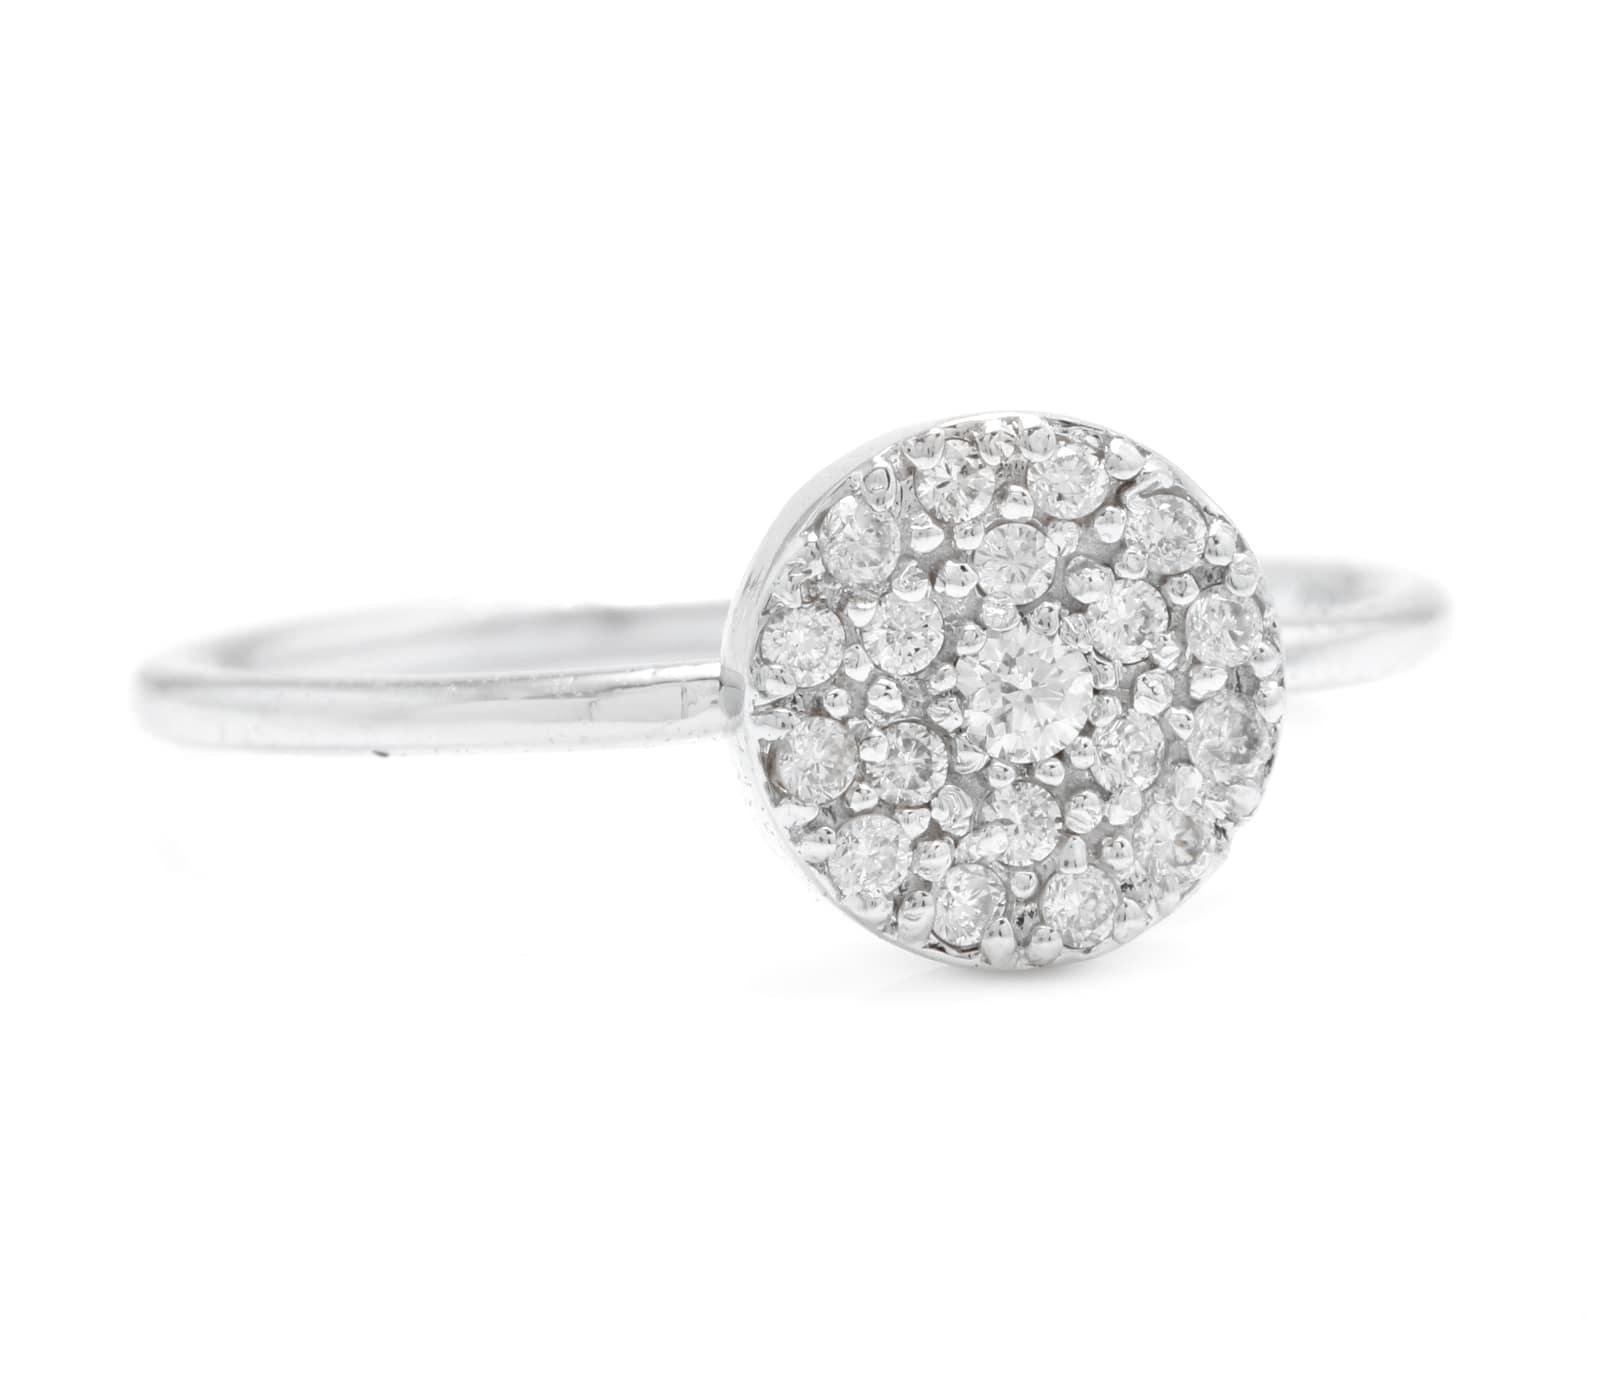 Splendid 0.15 Carats Natural Diamond 14K Solid White Gold Ring

Stamped: 14K

Total Natural Round Cut Diamonds Weight: Approx. 0.15 Carats (color G-H / Clarity SI1-SI2)

Diameter of the ring is: 7.6mm

Ring size: 7 (we offer free re-sizing upon